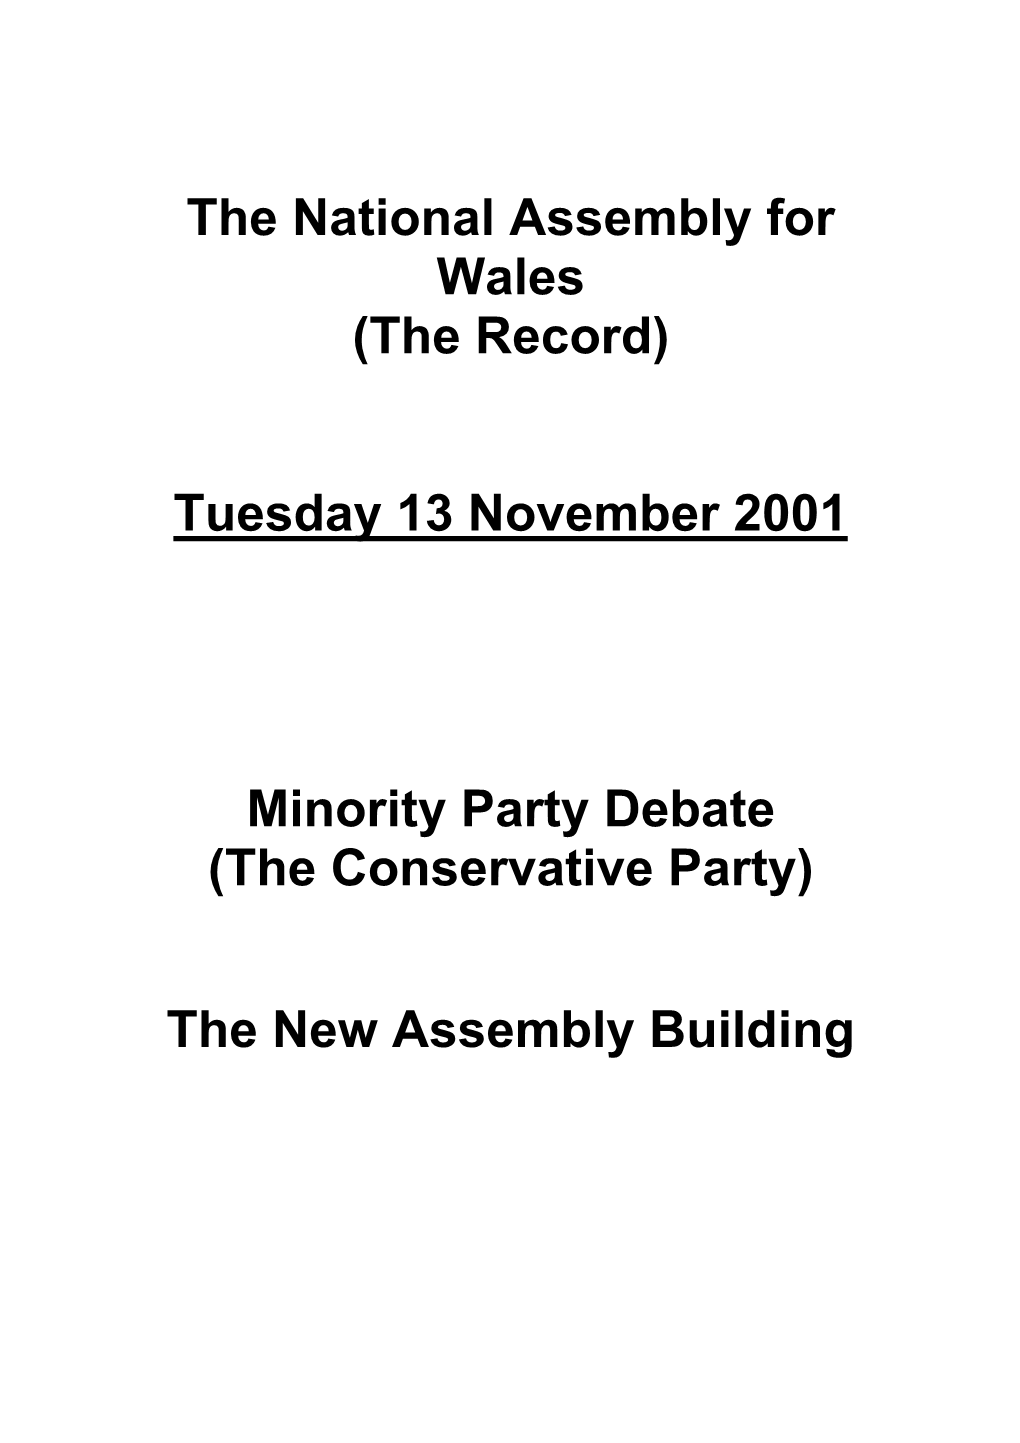 The National Assembly for Wales (The Record)